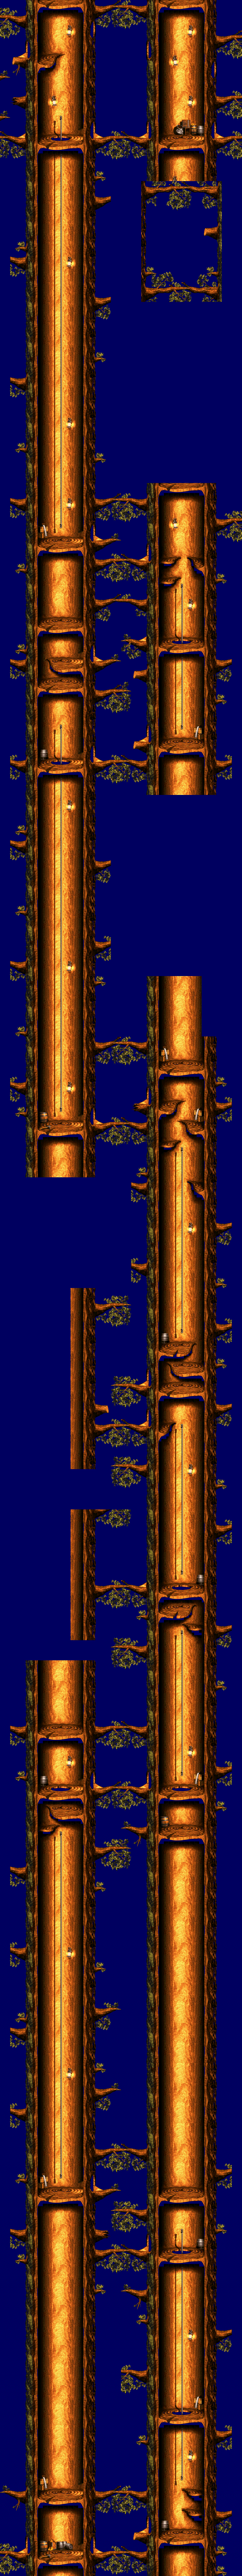 Donkey Kong Country 3: Dixie Kong's Double Trouble - Barrel Shield Bust-Up